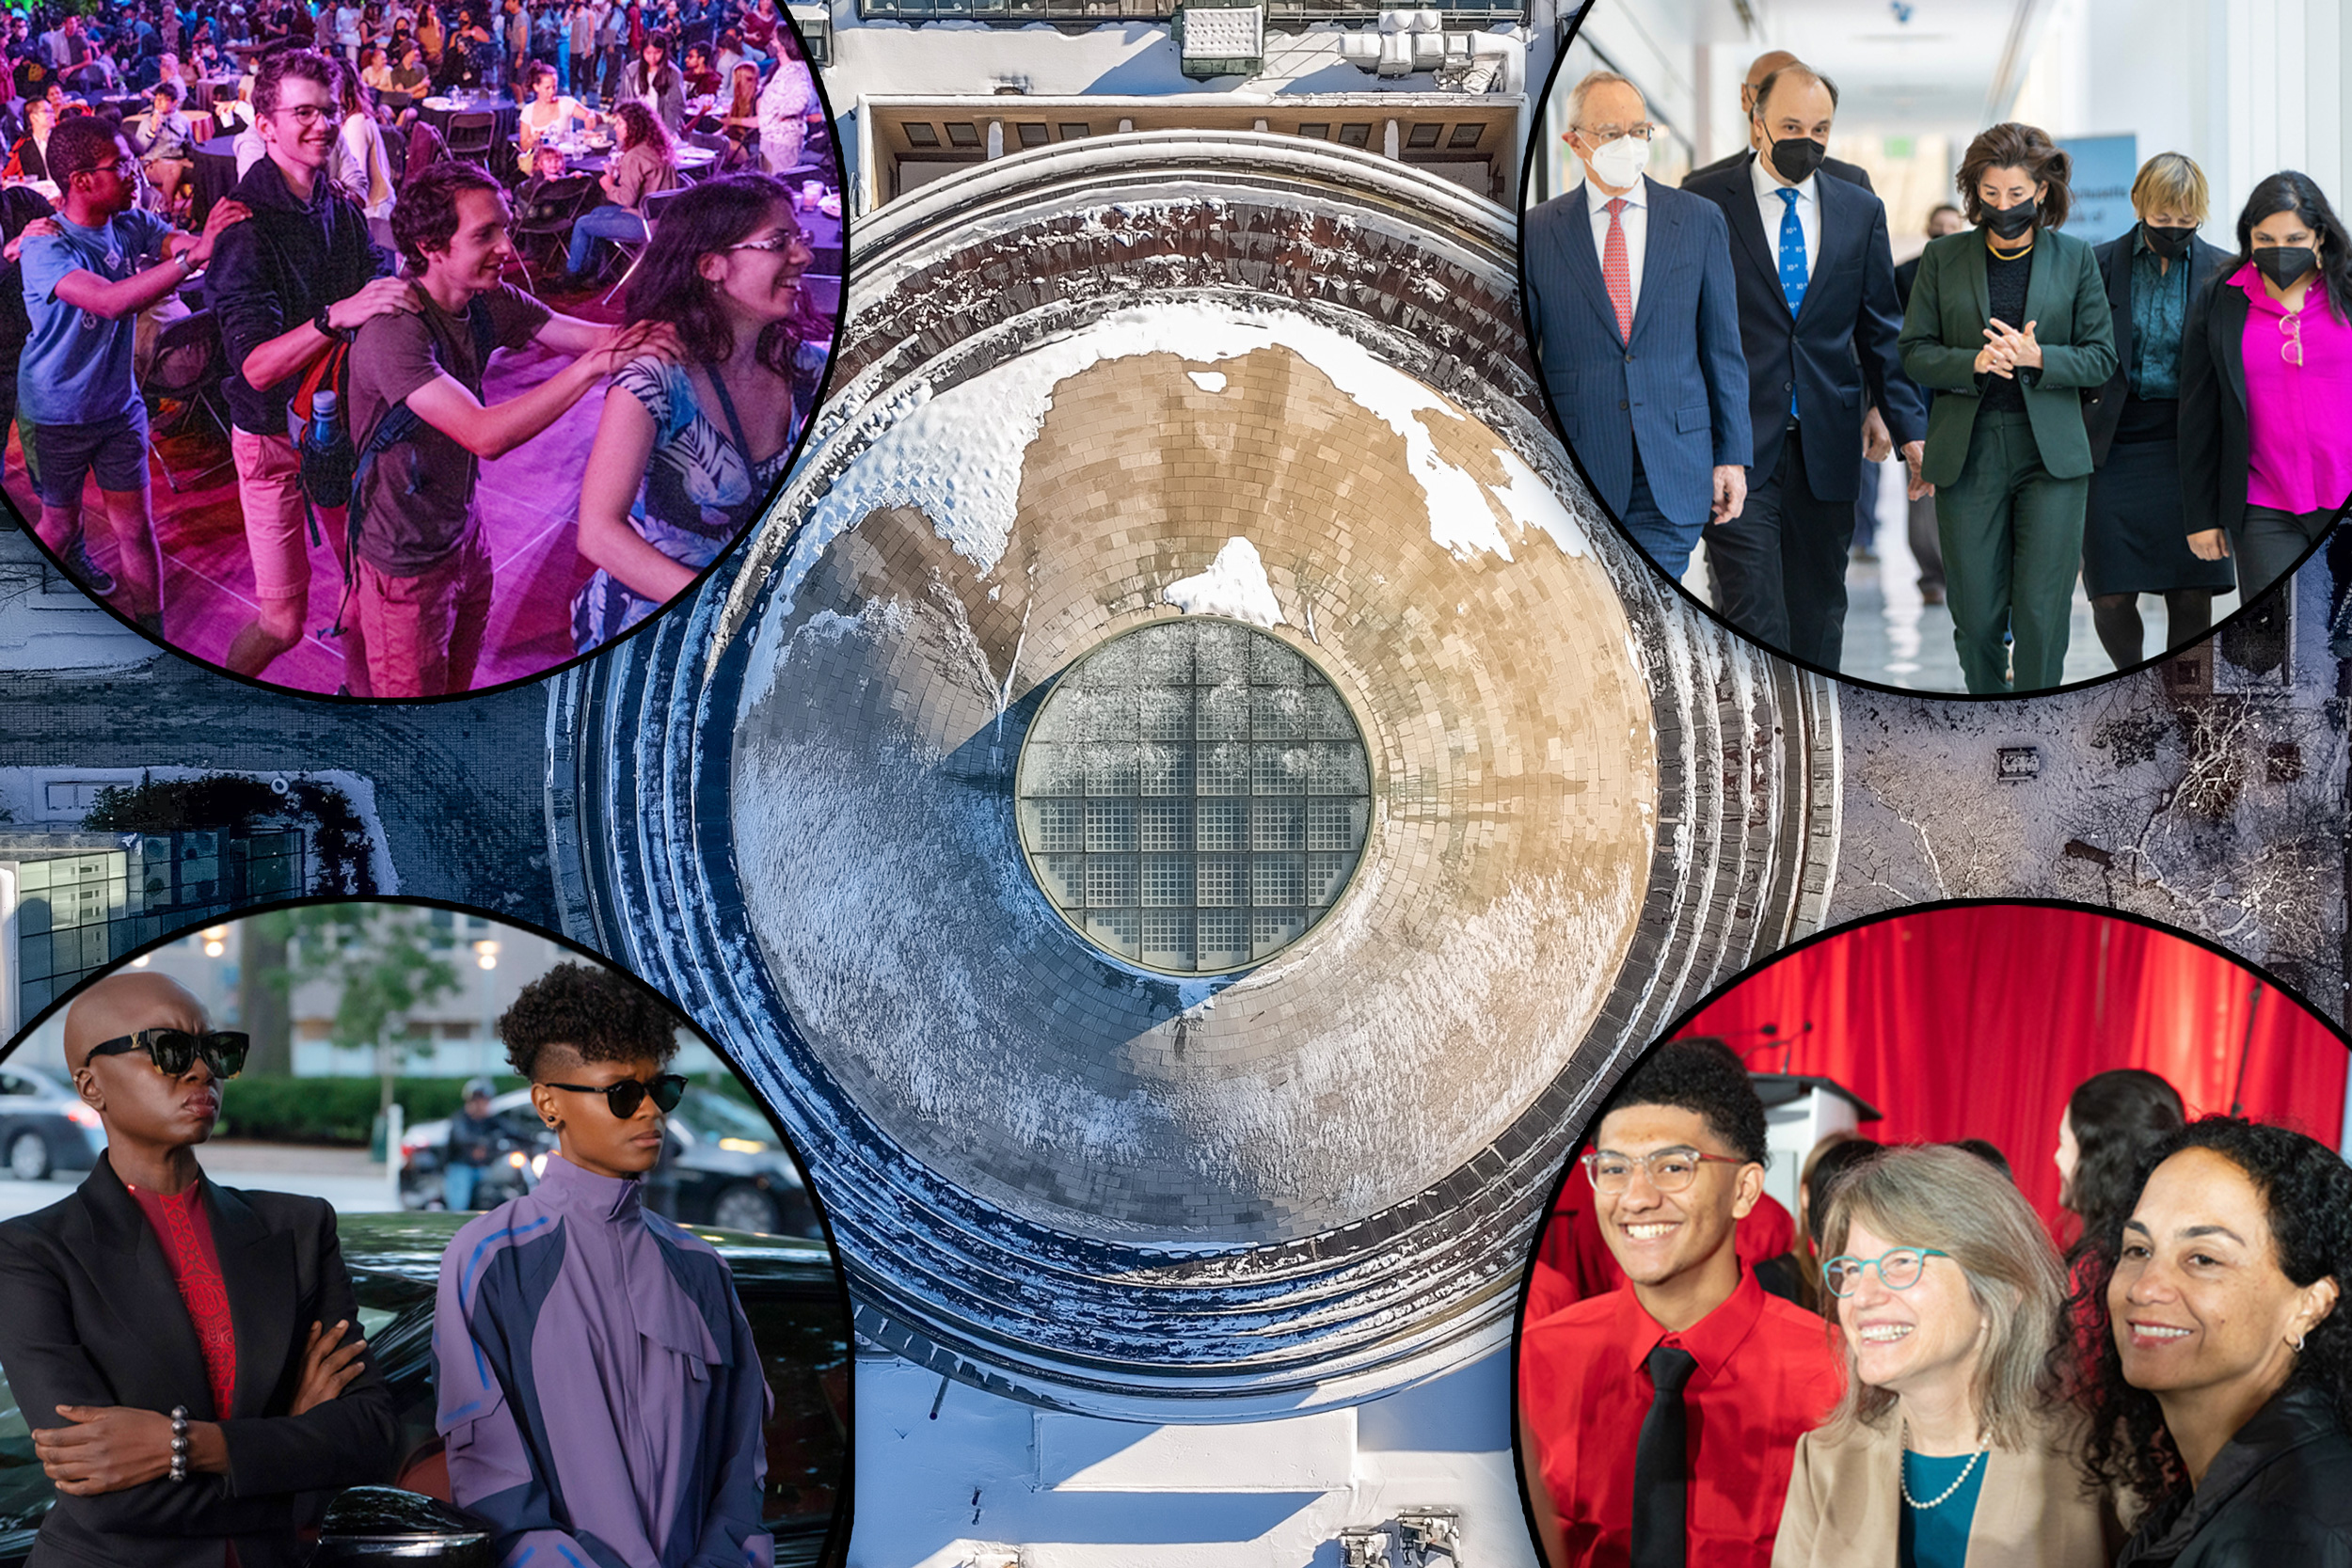 On campus, key moments of 2022 included an Institute-wide dance celebration, a visit from U.S. Secretary of Commerce Gina Raimondo, a community event to welcome new president Sally Kornbluth, and a special screening of Marvel Studios’ “Black Panther: Wakanda Forever.”